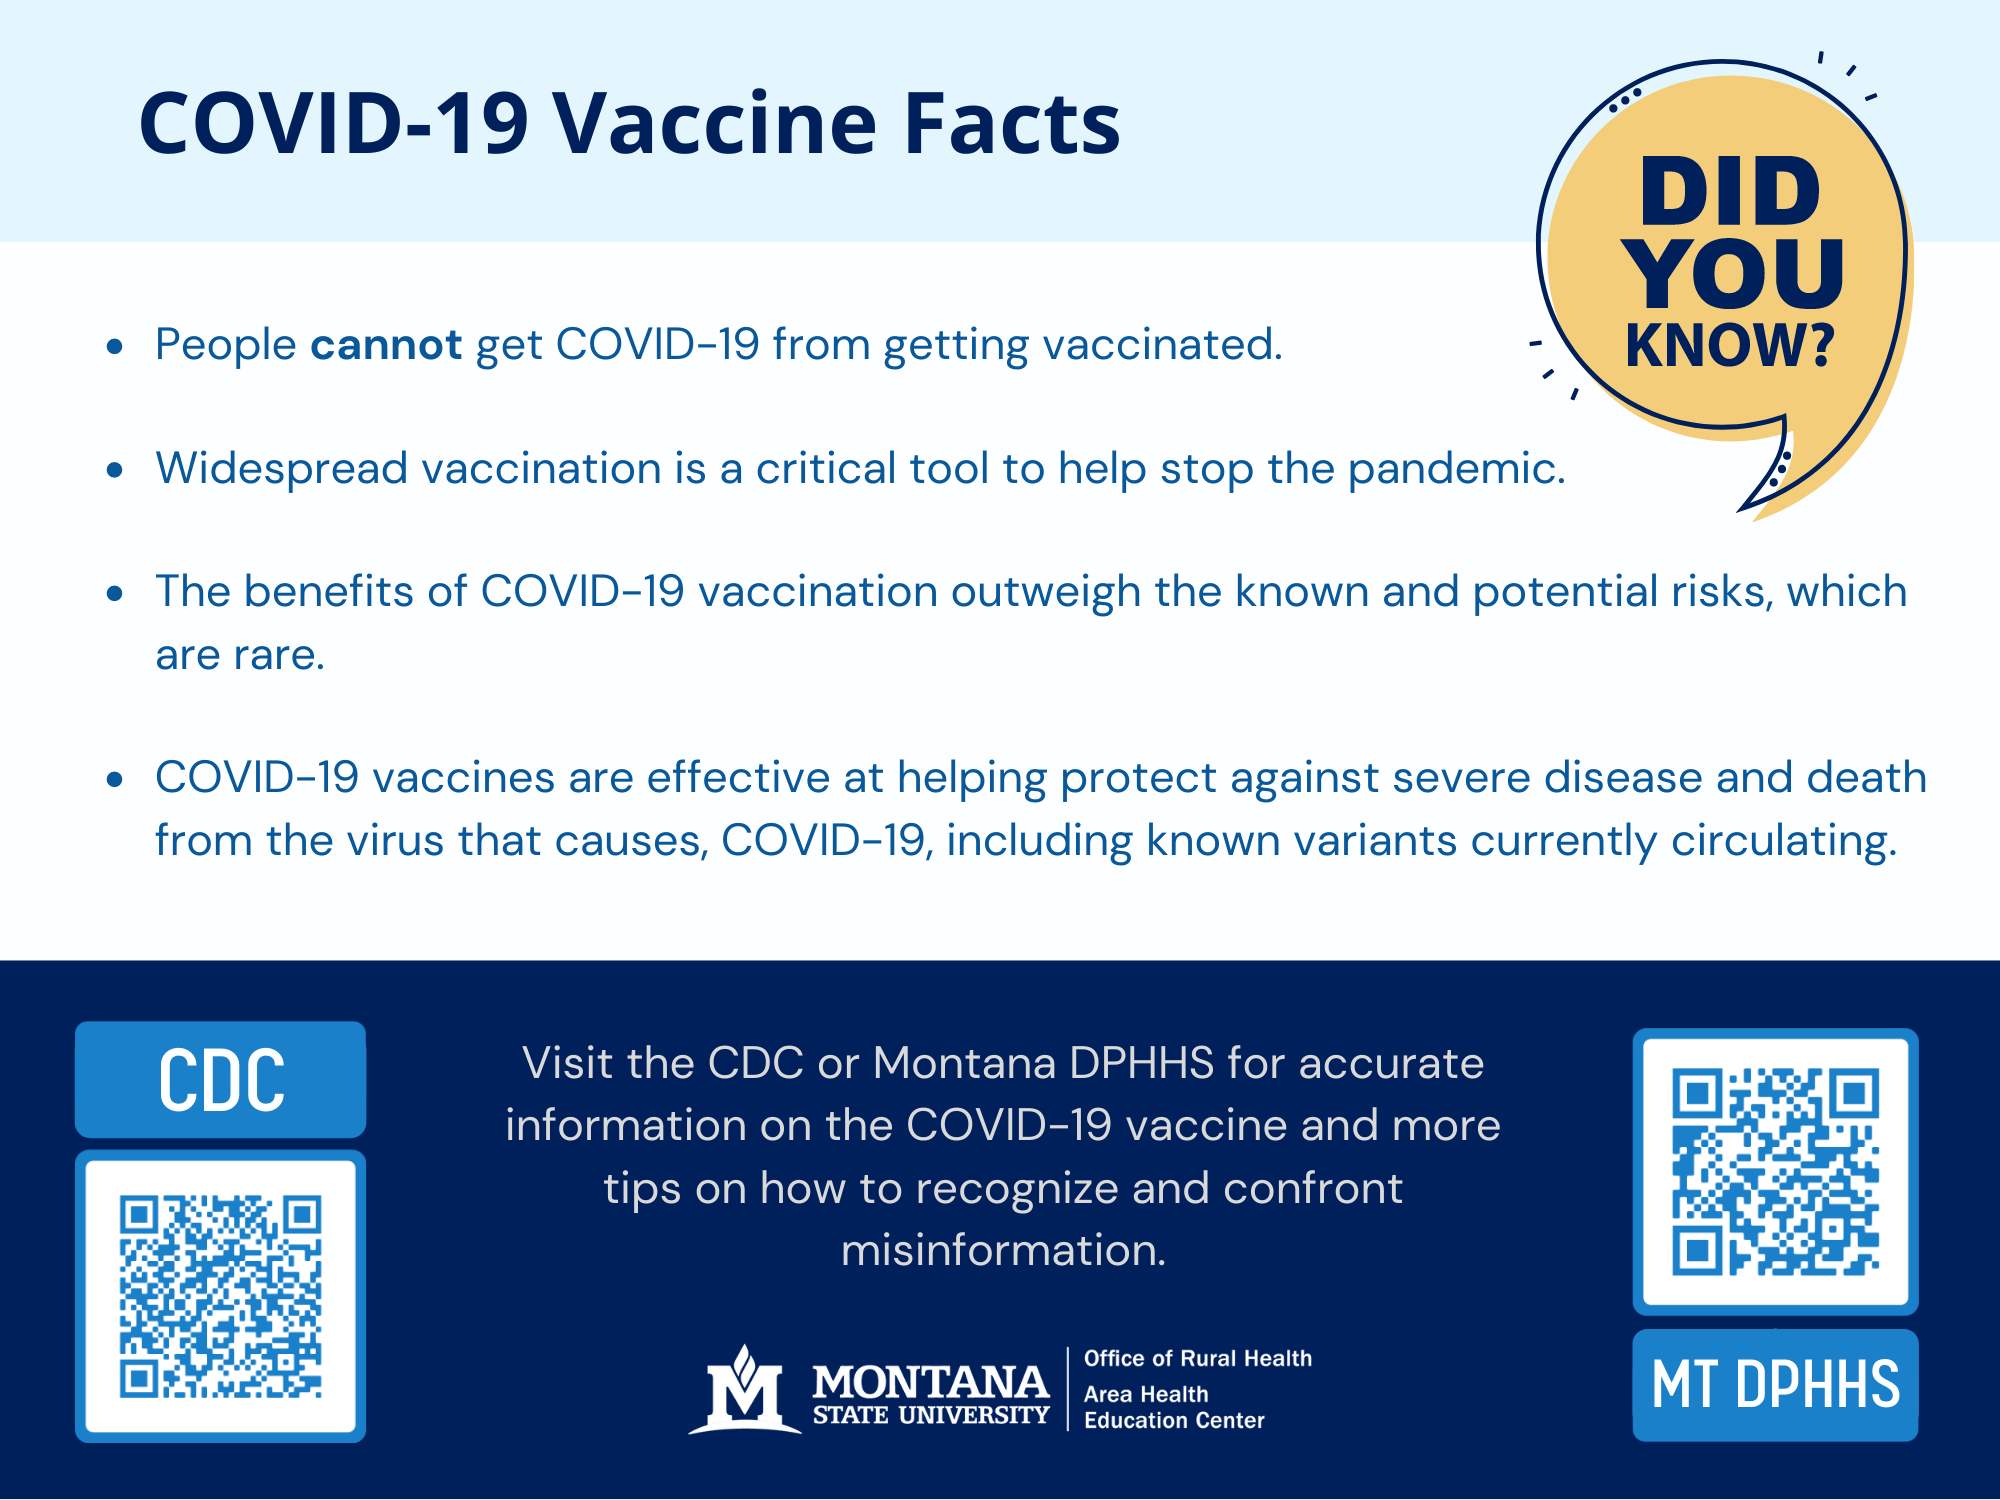 Did you know? People cannot get COVID-19 from getting vaccinated. Widespread vaccination is a critical tool to help stop the pandemic. The benefits of COVID-19 vaccination outweigh the known and potenitla risks, which are rare. COVID-19 vaccines are effective at helping protect against severe disease and death from the virus that causes COVID-10, including known variants currently circulating. Visit the CDC or Montana DPHHS for accurate information on the COVID-19 vaccine and more tips on hoe to recognize and confront misinformation. 